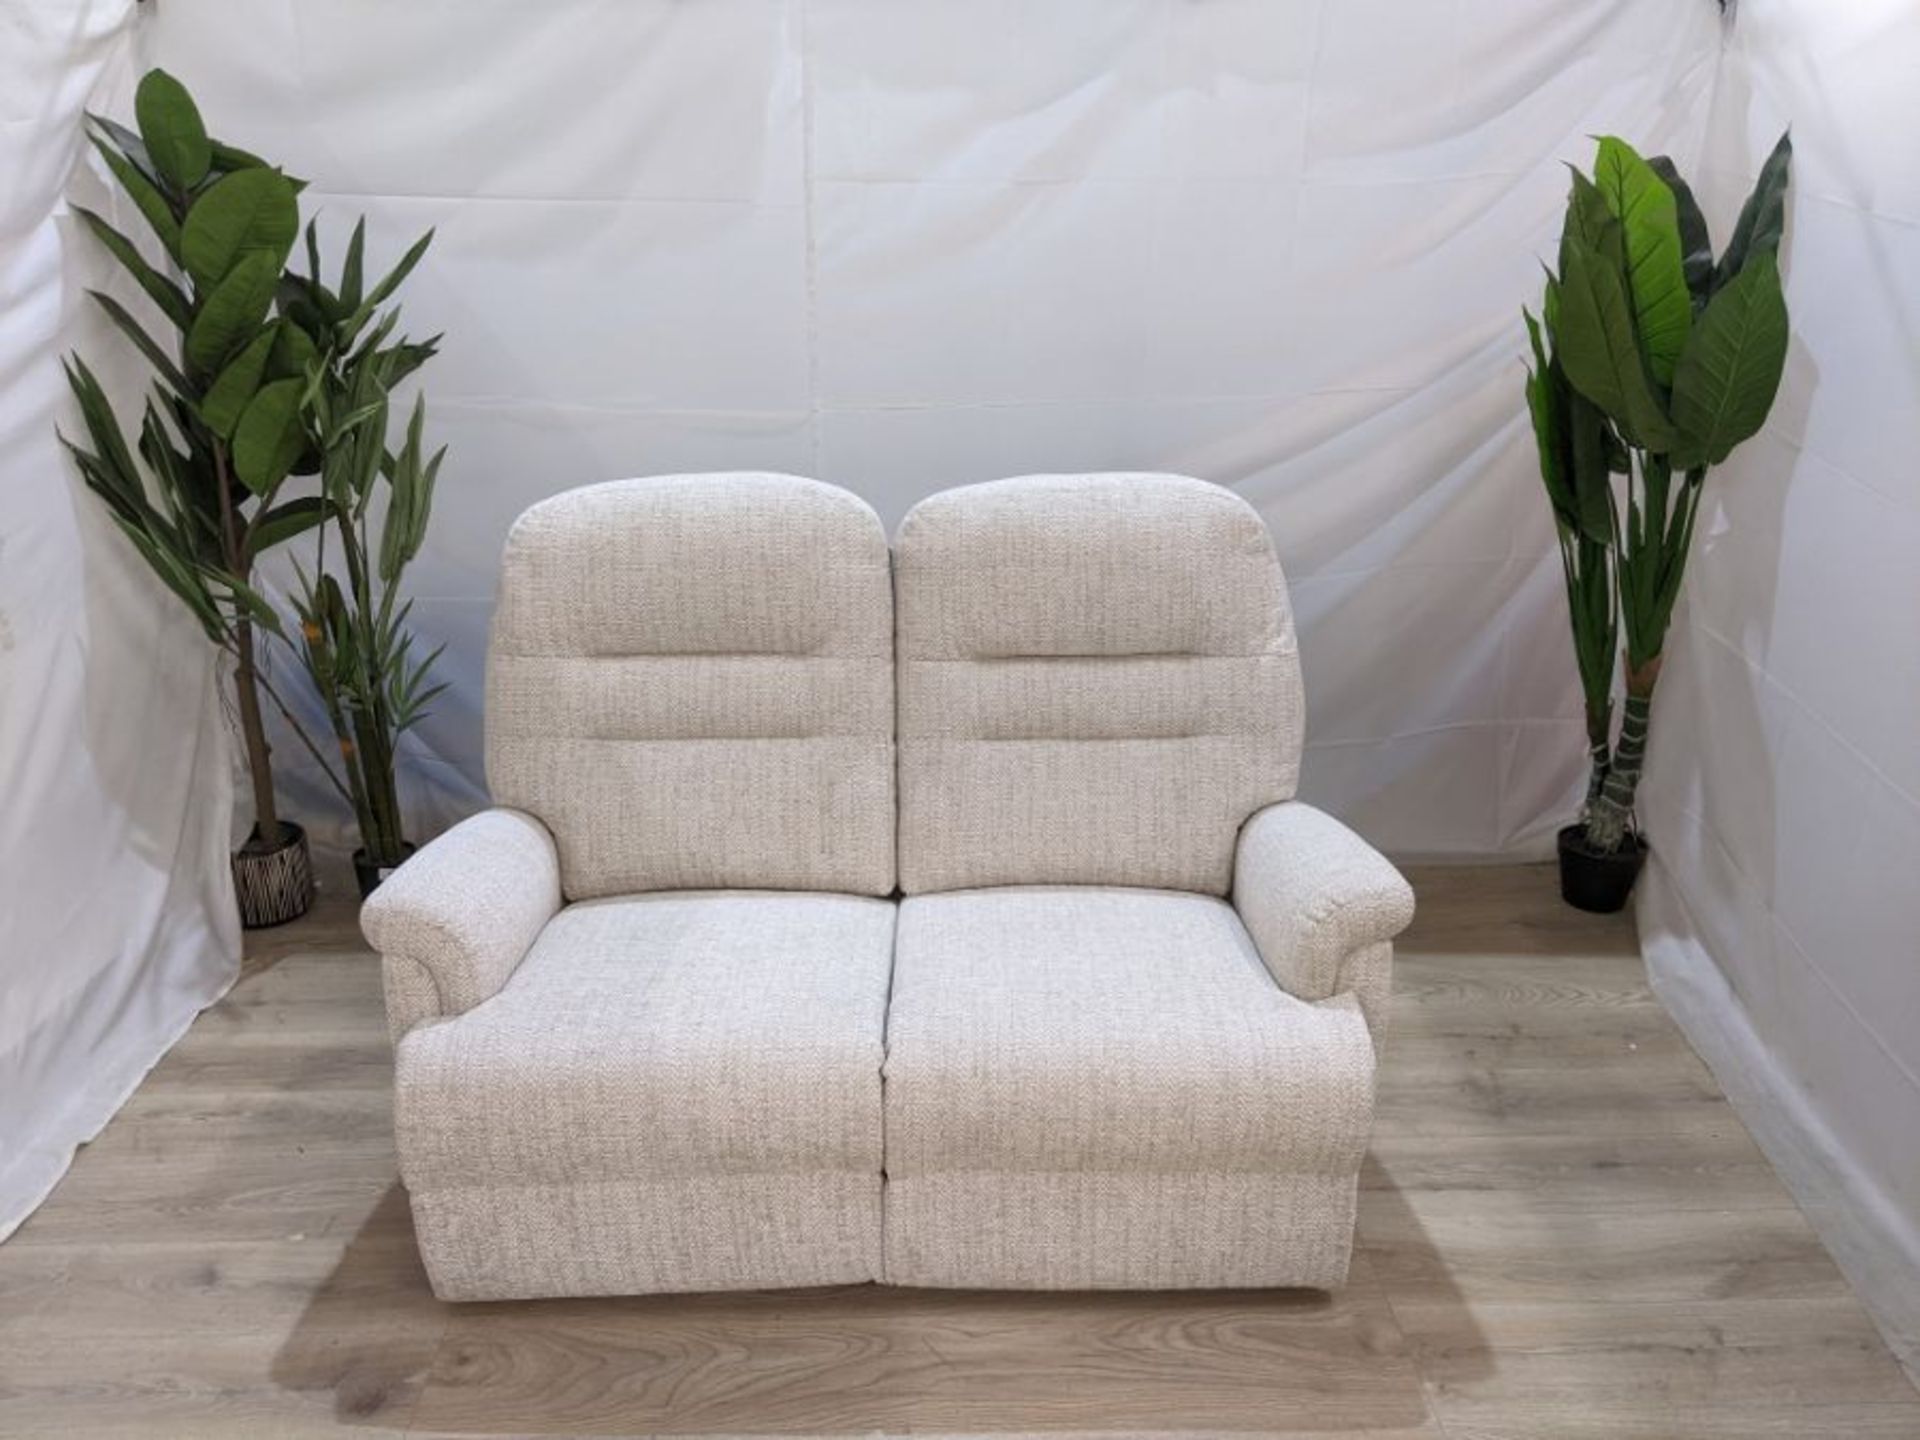 HSL Penrith Super Petite Canillo Ivory 2 Seater Sofa Head Support RRP 1360 SKU HSL-AP-FT0102981137D - Image 3 of 3